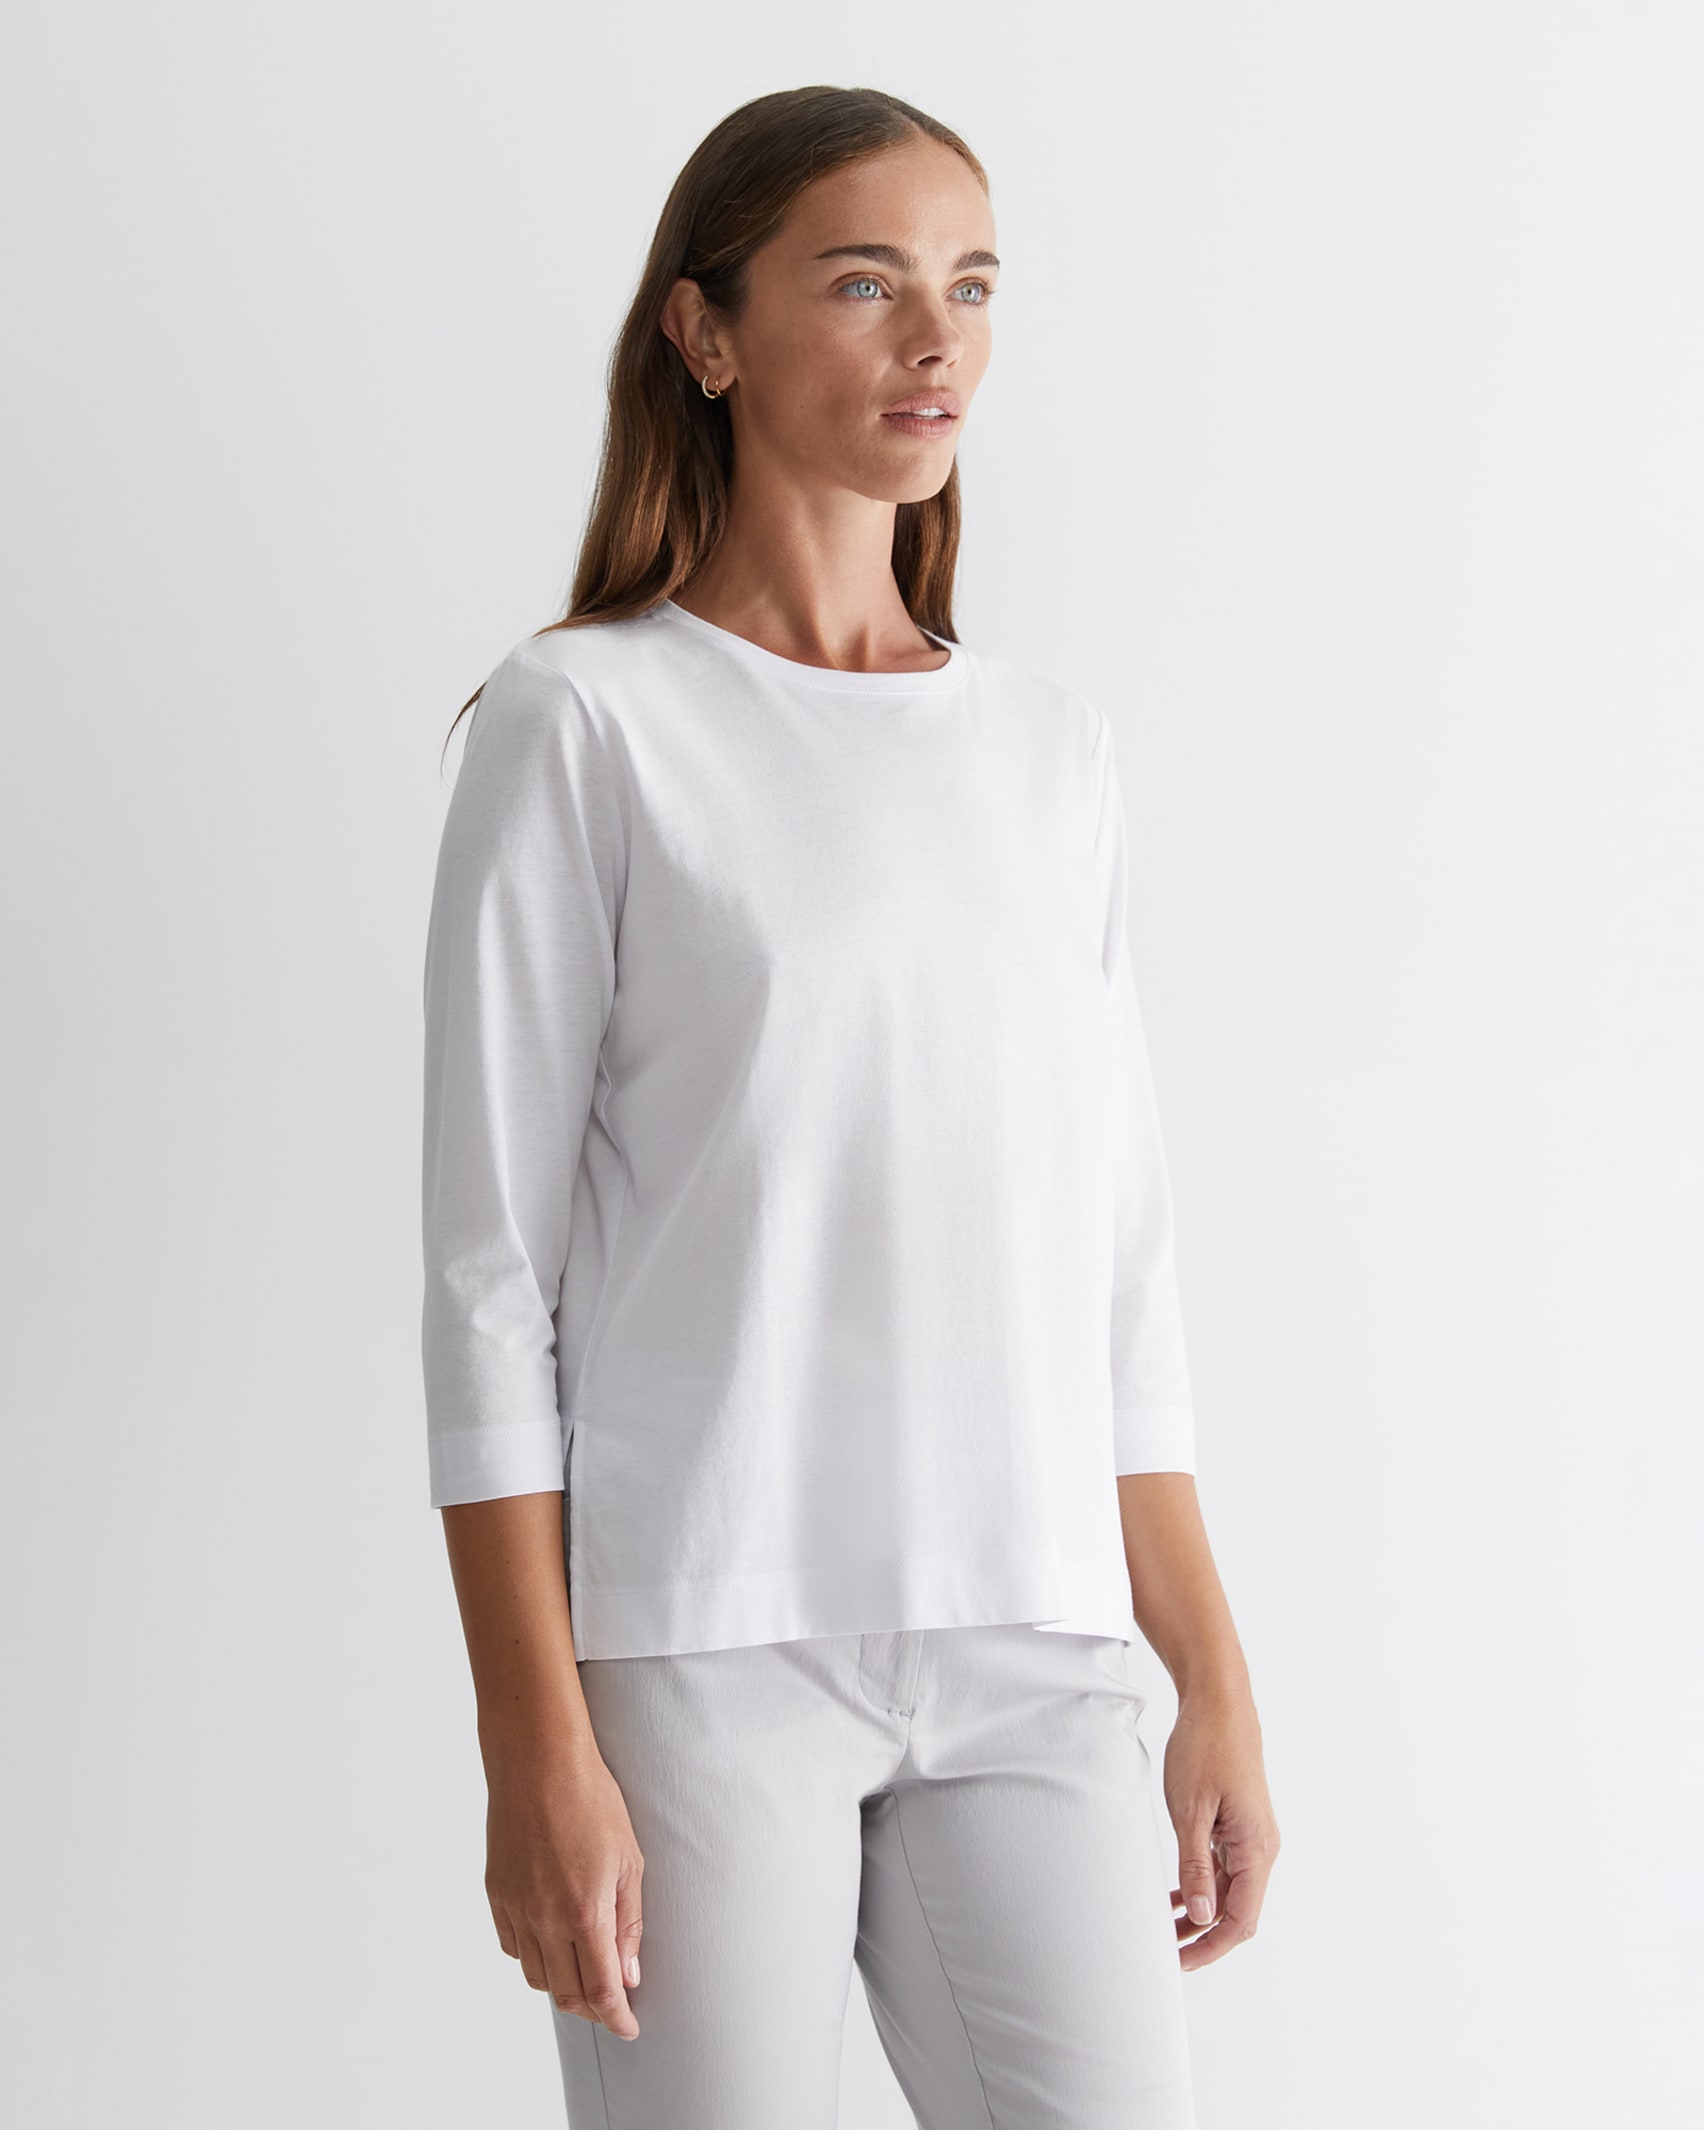 Cotton Crew 3/4 Sleeve T-Shirt in WHITE